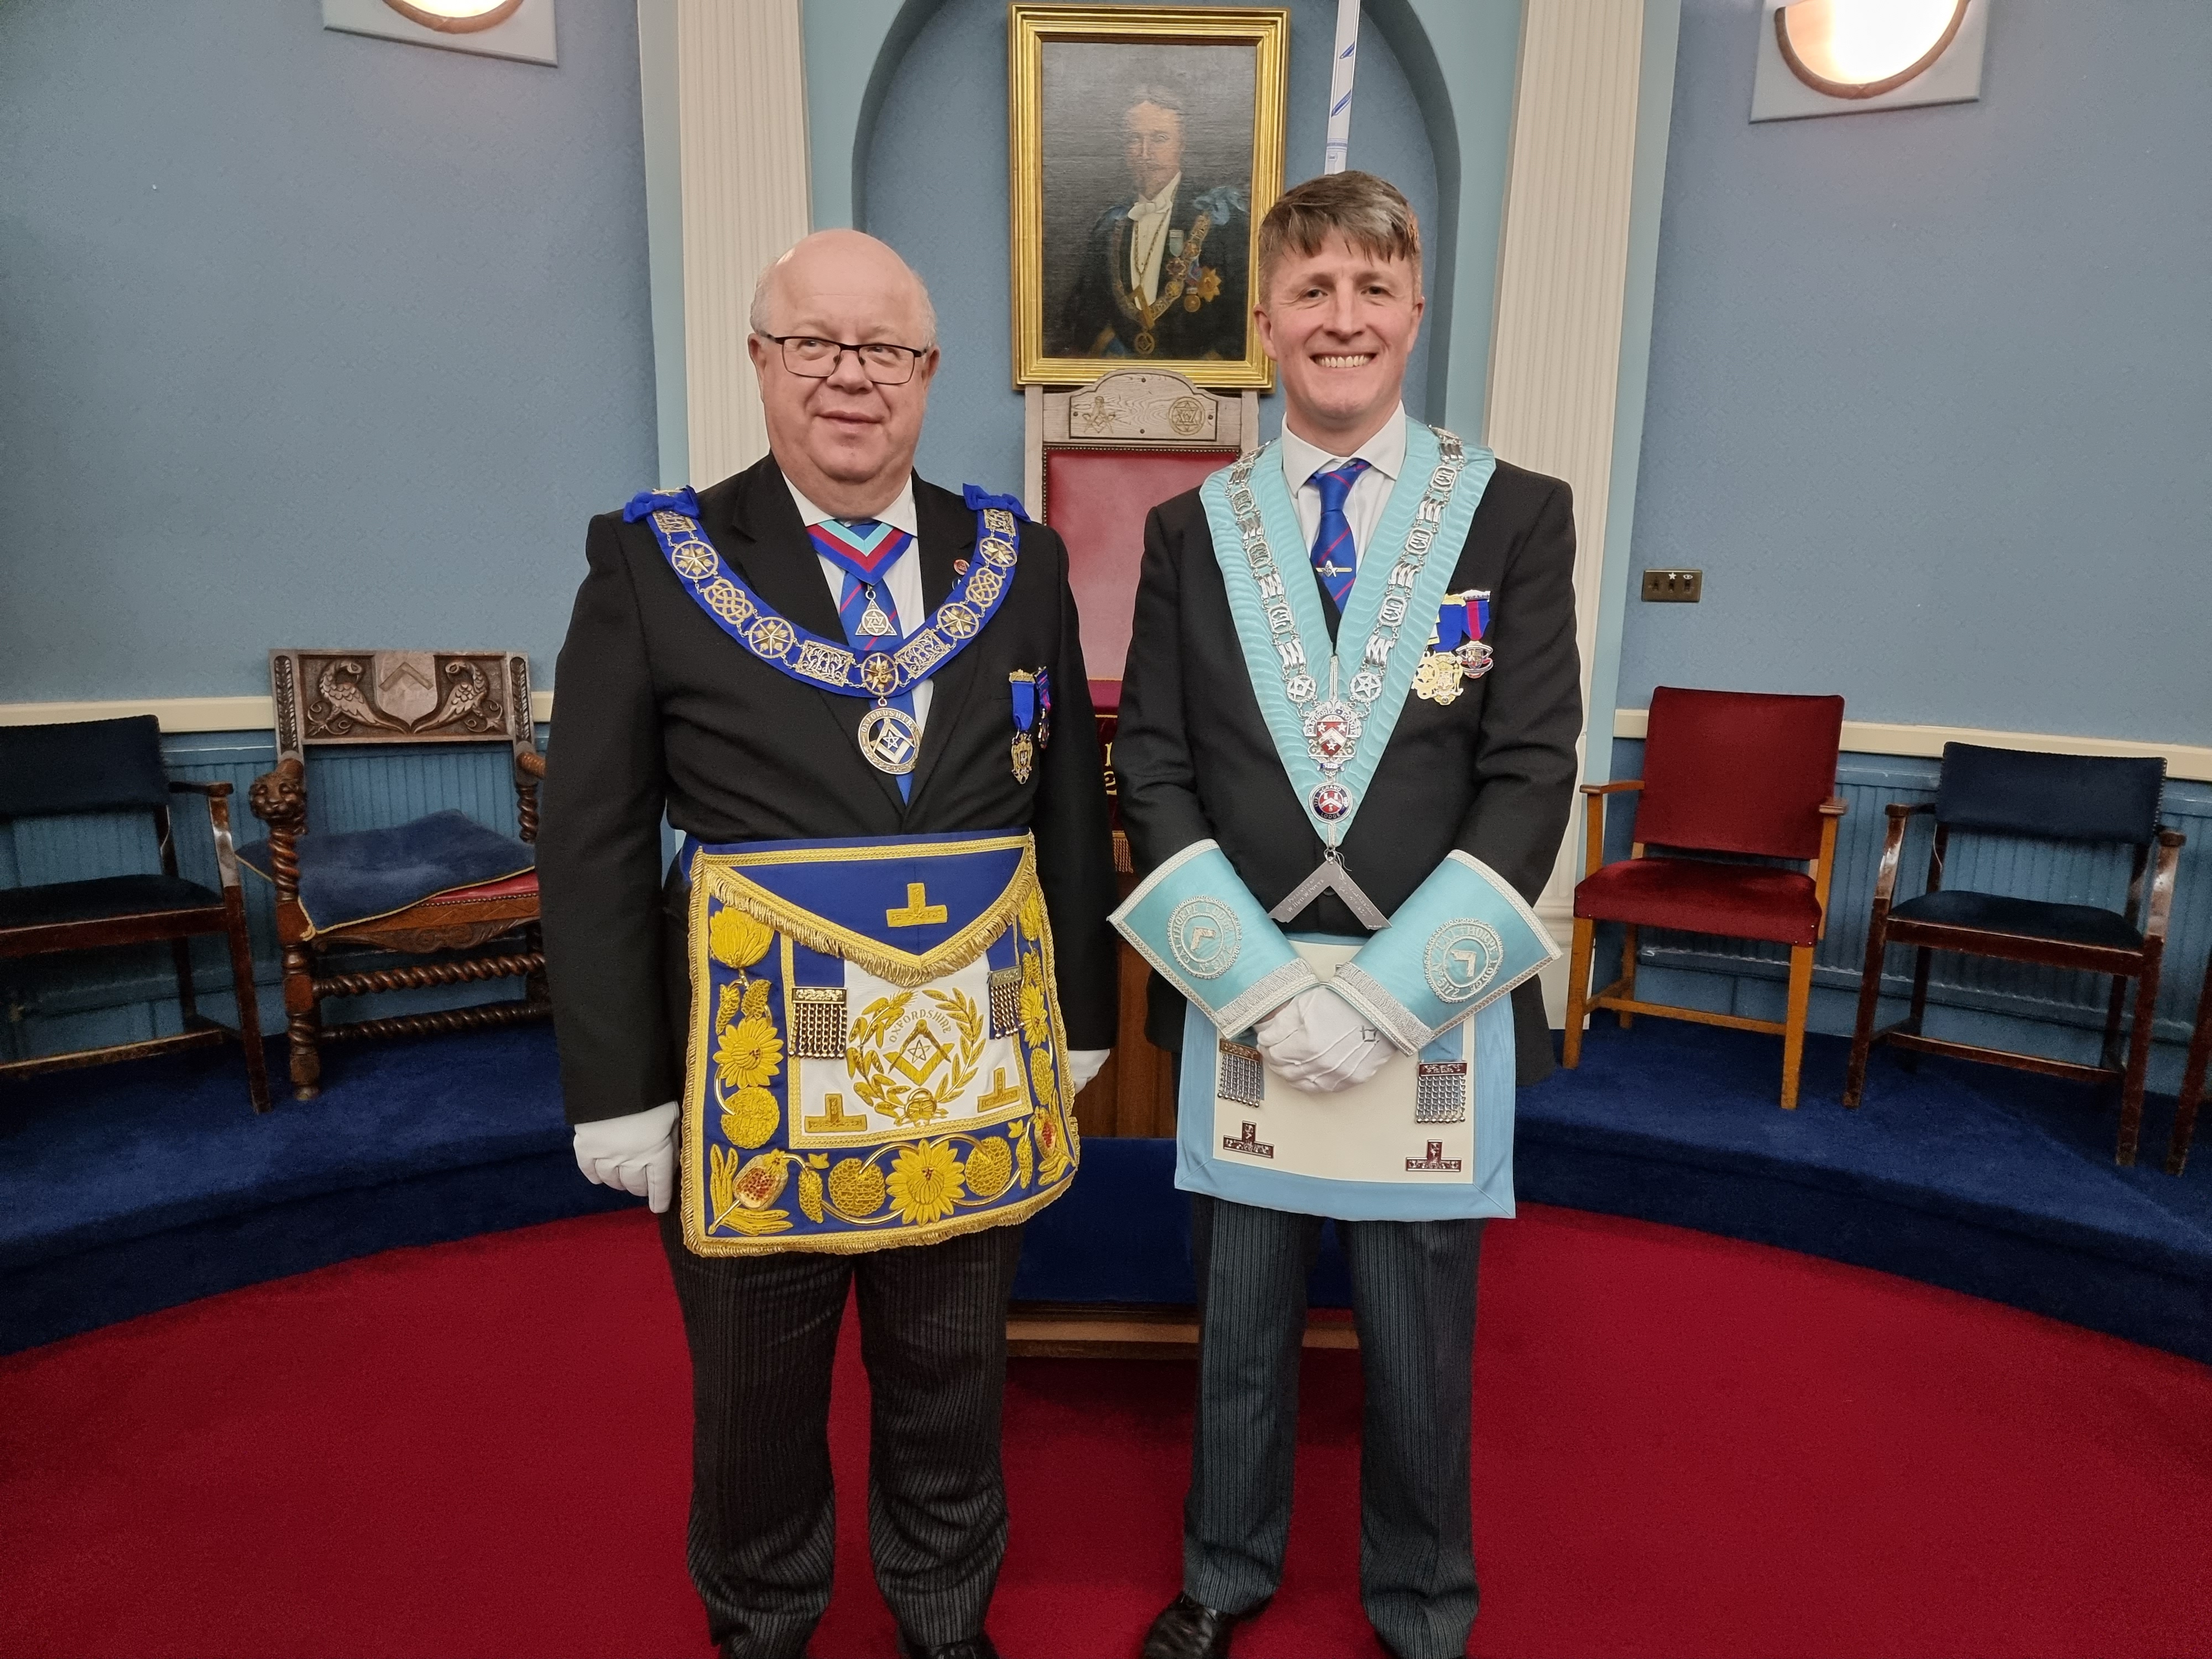 W.Bro James Robert Guy Hilditch PGM and W.Bro Chris Couldson